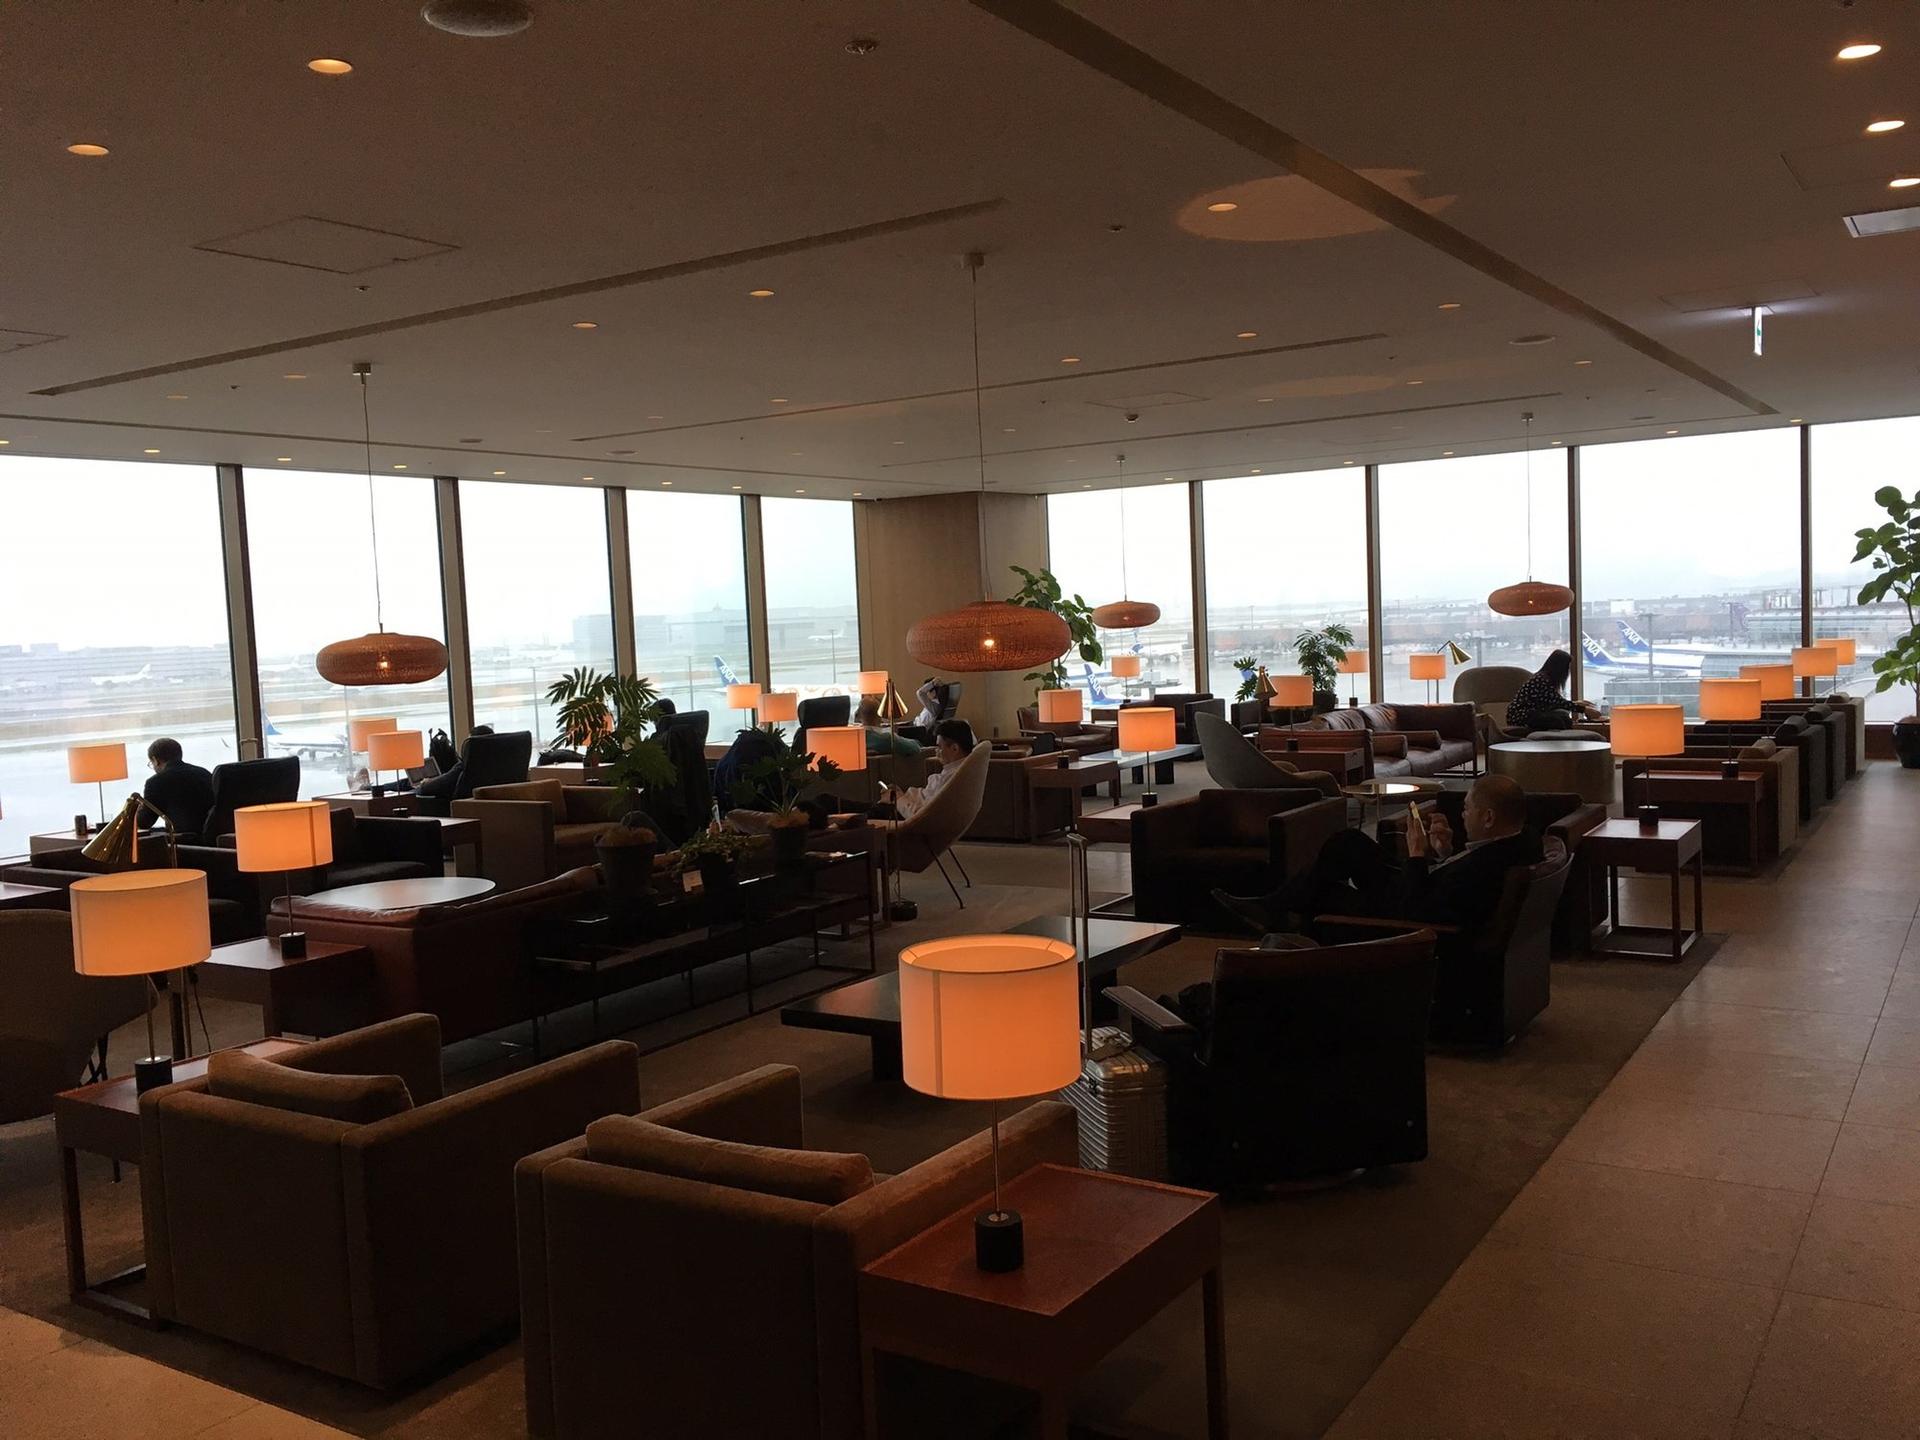 Cathay Pacific Lounge image 30 of 49